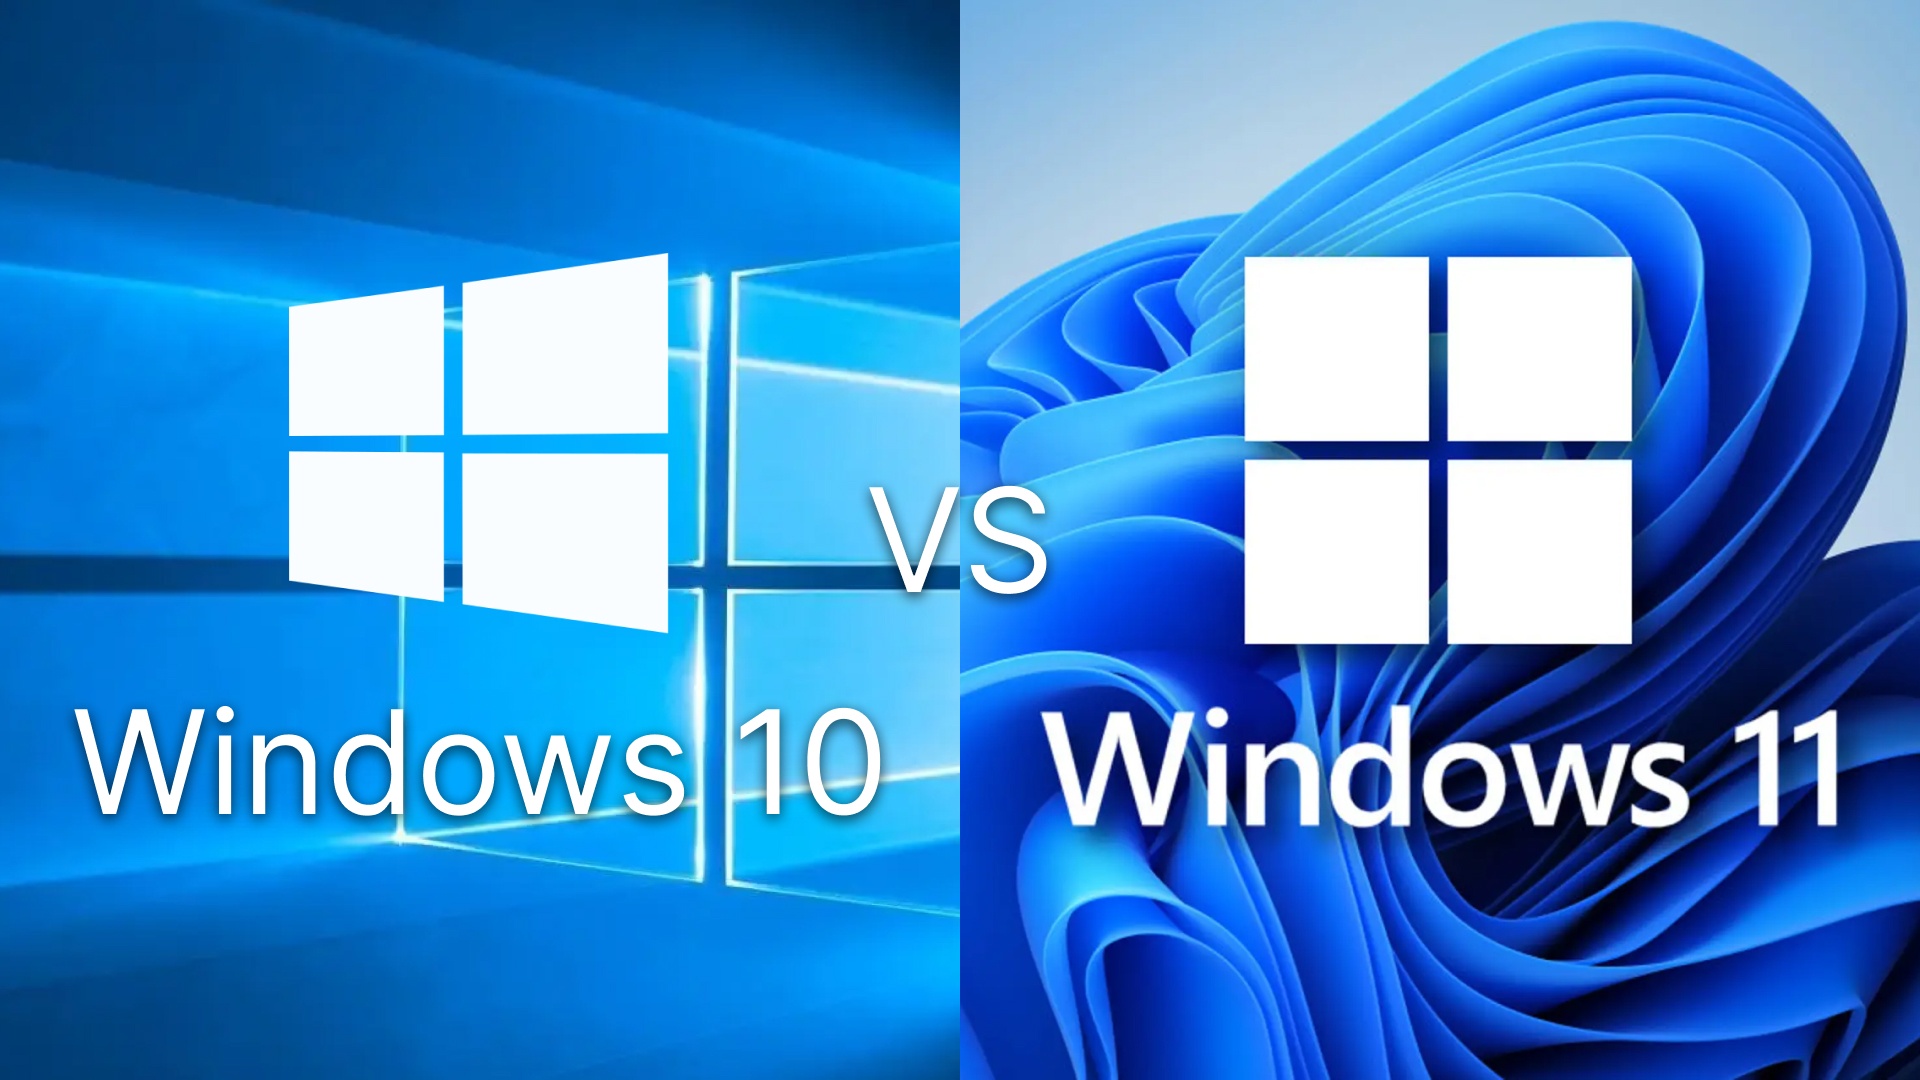 Windows 10 vs Windows 11 A Comprehensive Comparison of Features and